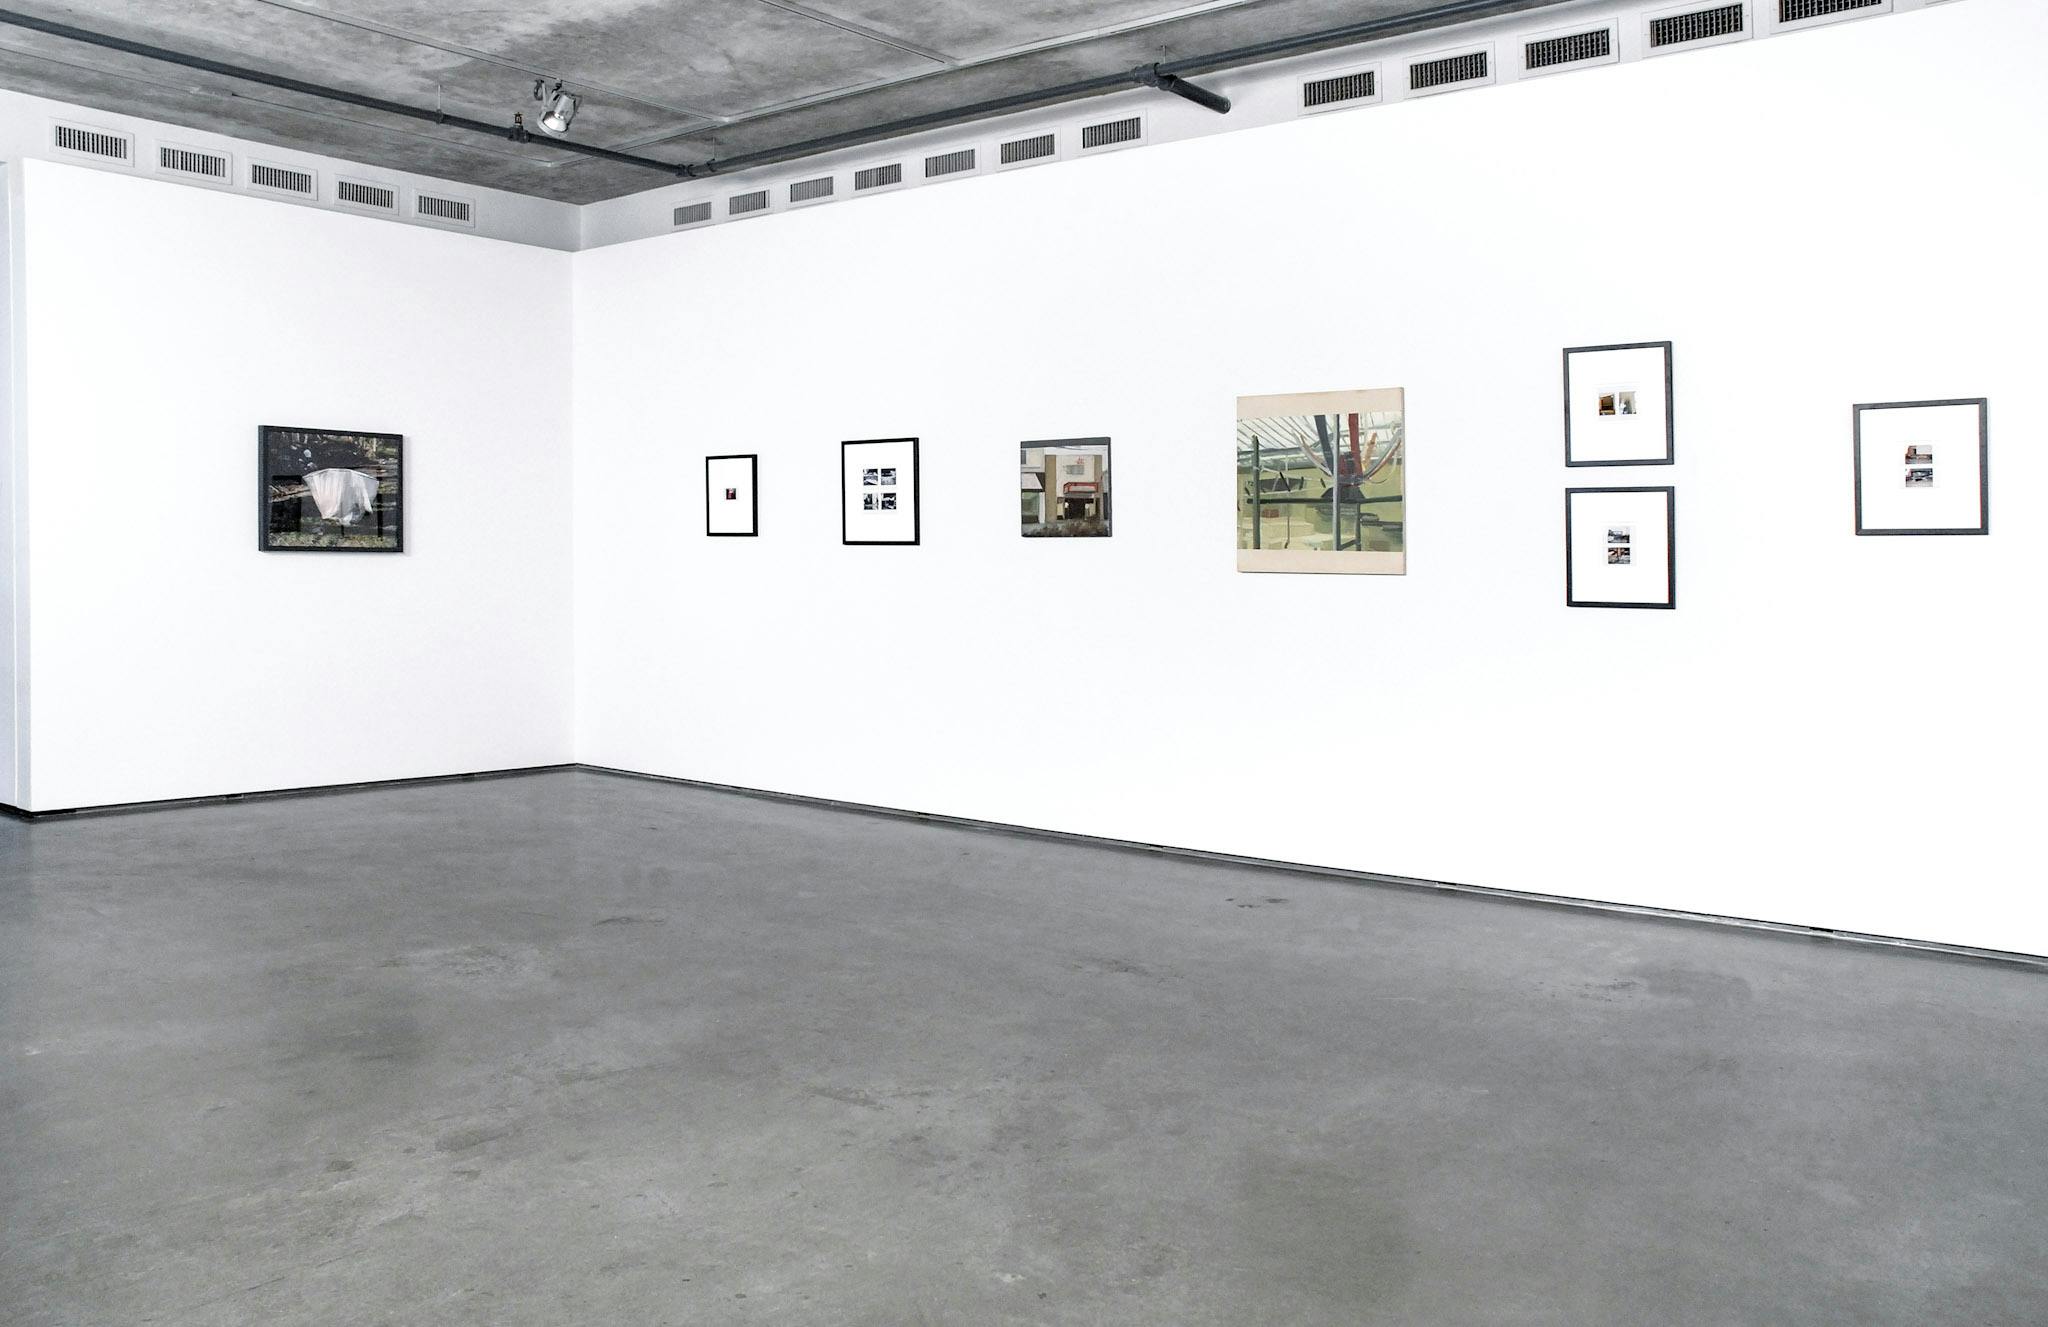 Various two-dimensional artworks are installed on the gallery walls. Some of them are small-sized photographs and others are paintings. They all depict urban landscapes. 